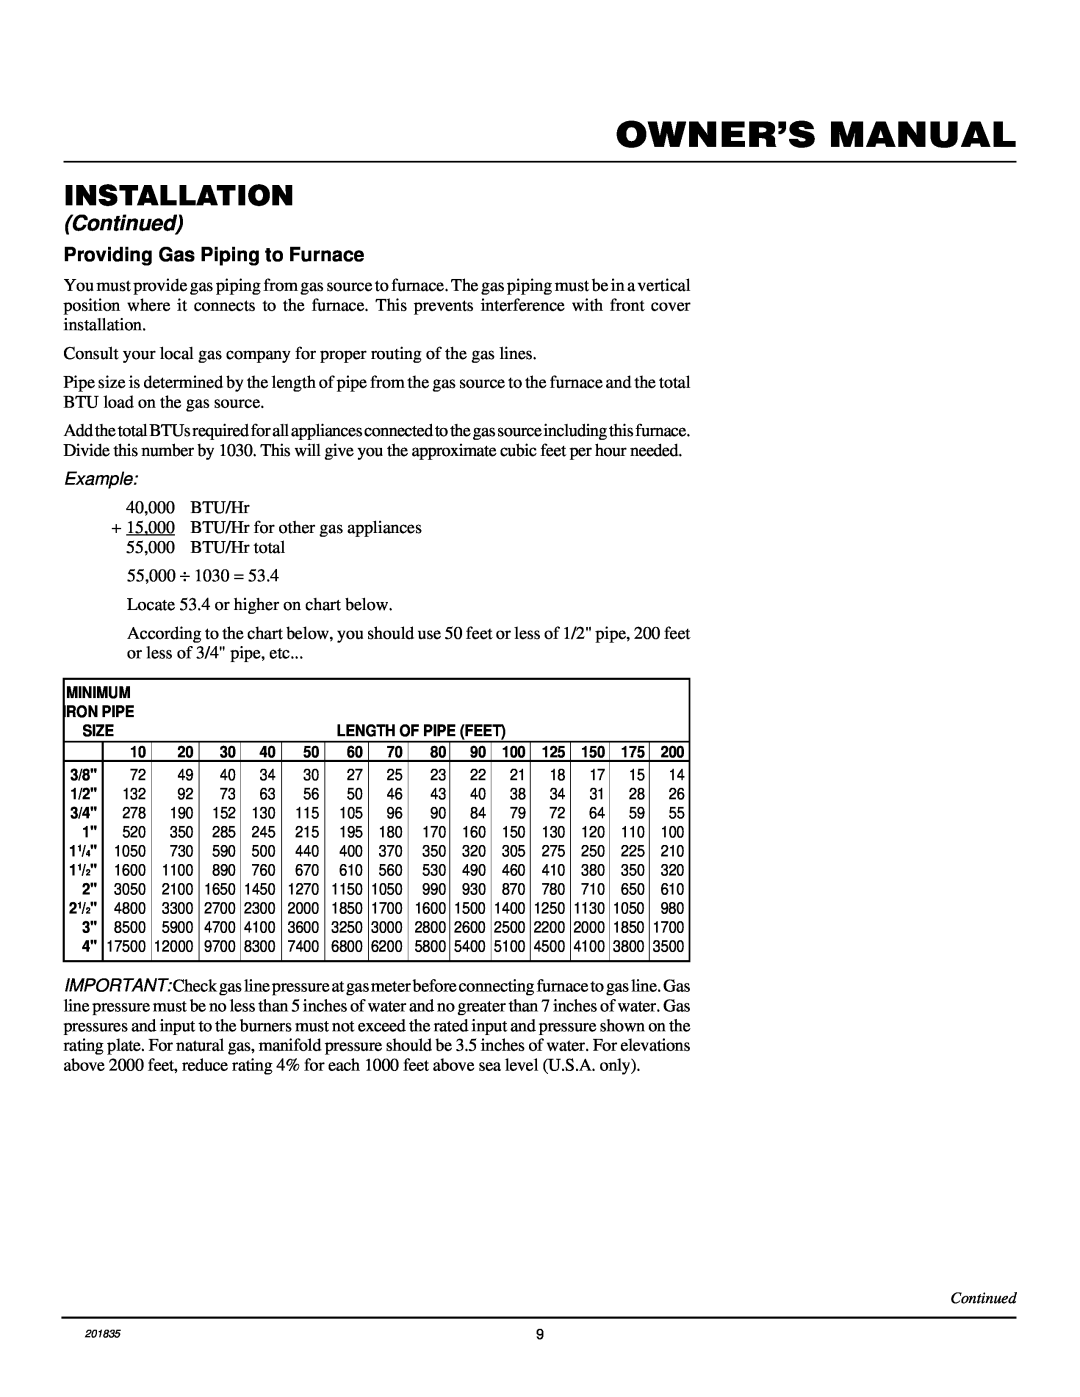 Desa DNV25NB, DNV40NB installation manual Installation, Continued, Providing Gas Piping to Furnace 